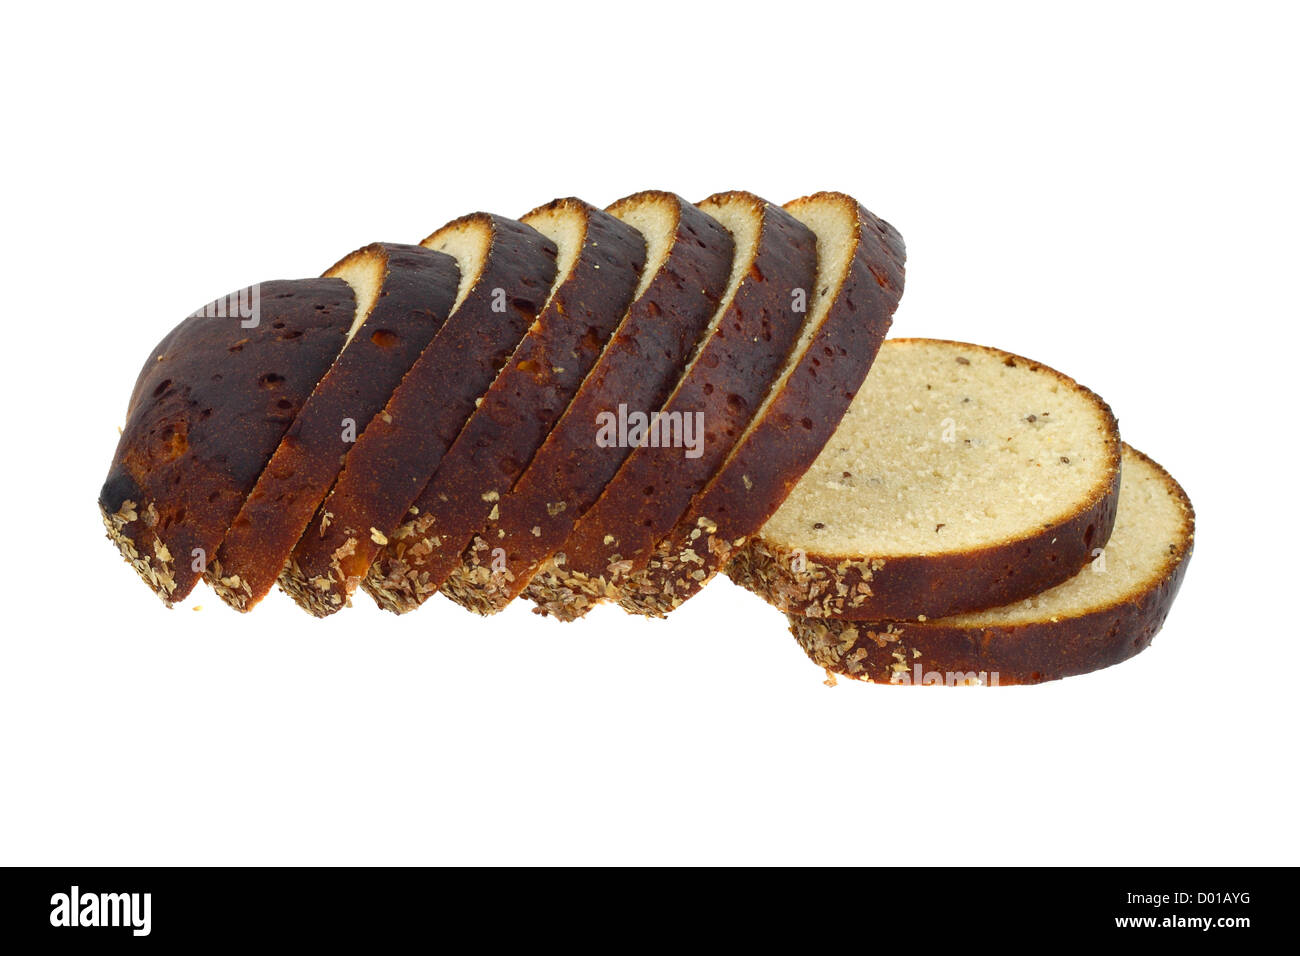 Sliced fresh bread baked from wheat and rye flour blend isolated on white Stock Photo